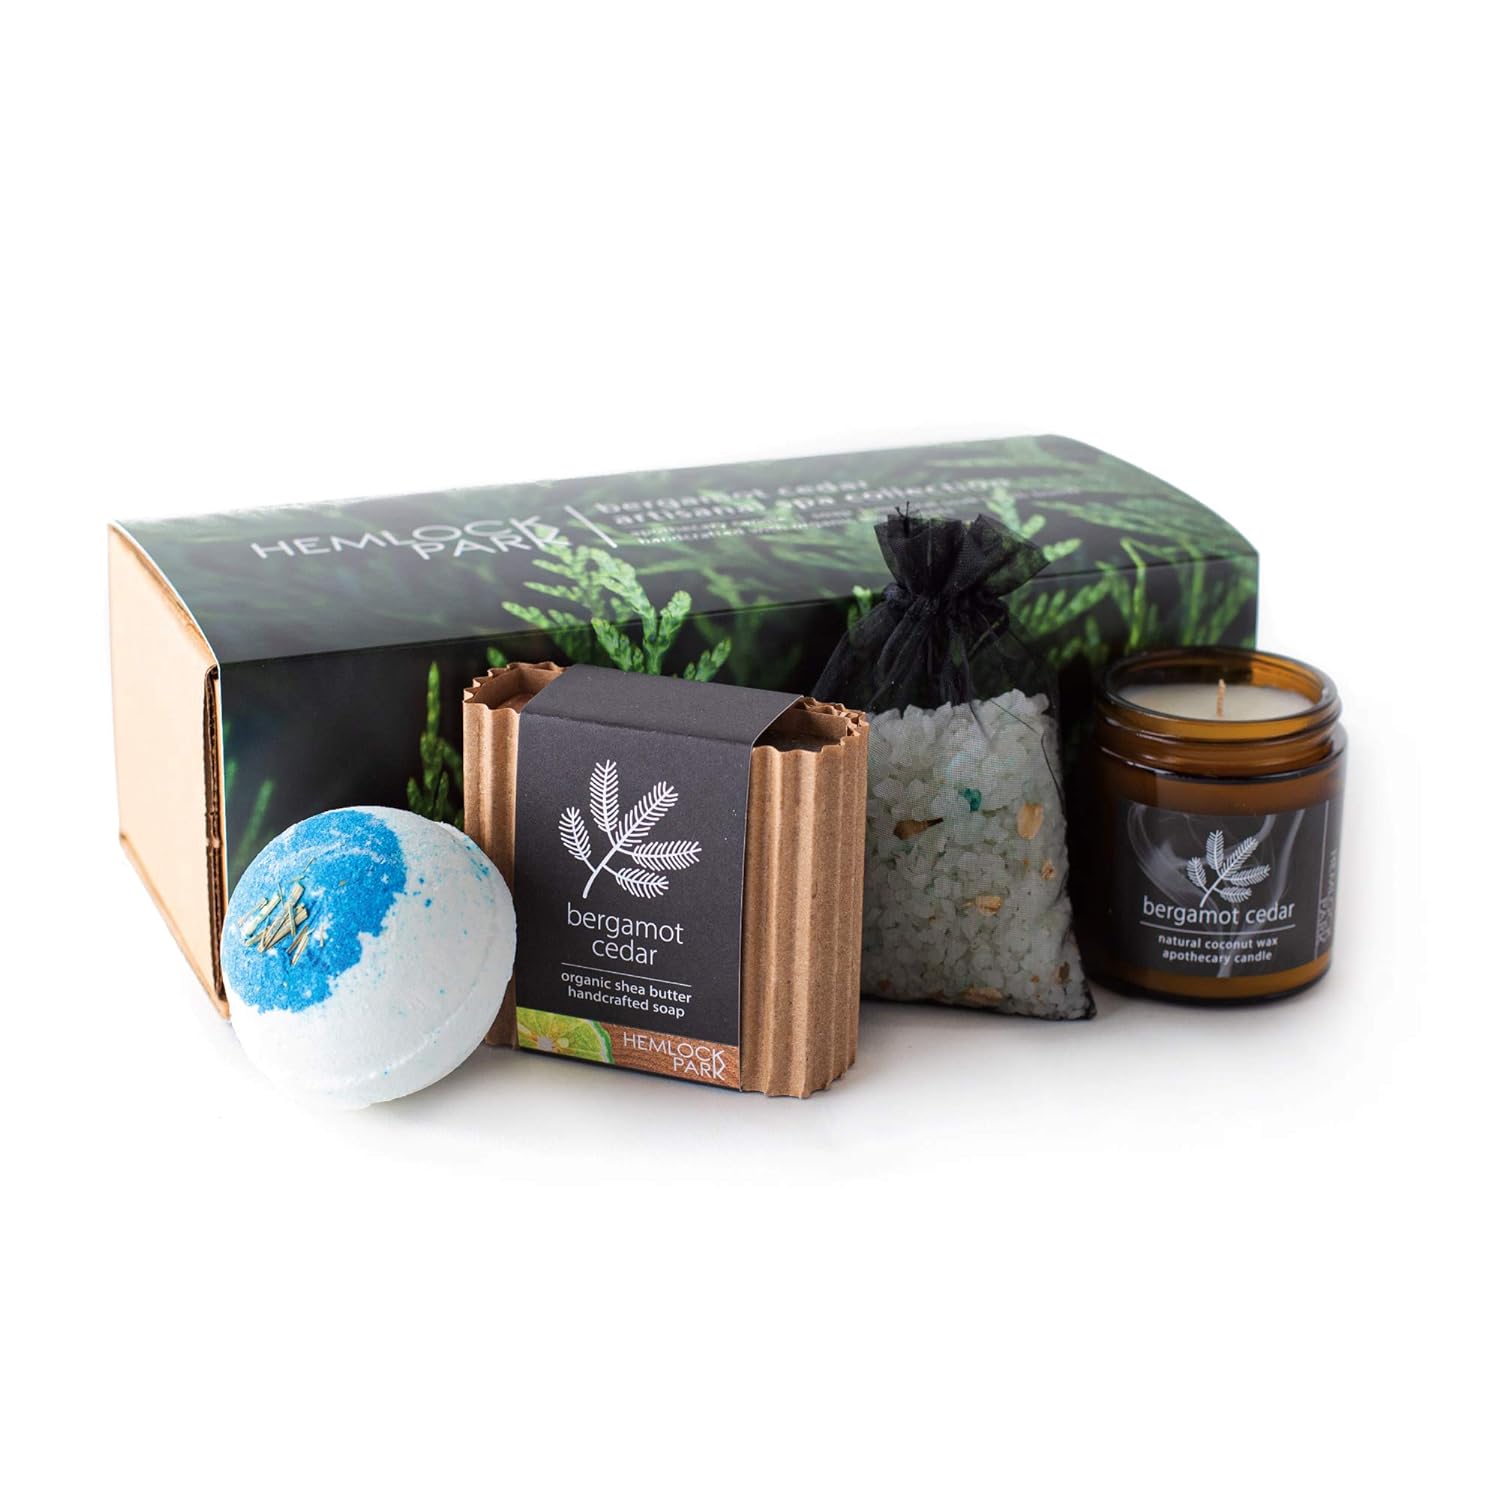 Heock Park Artisanal Spa Collection | Apothecary Candle, Shea Butter Soap, Bath Bomb, Mineral Salt Bath Soak | Handcrafted with Organic Ingredients (Bergamot Cedar)